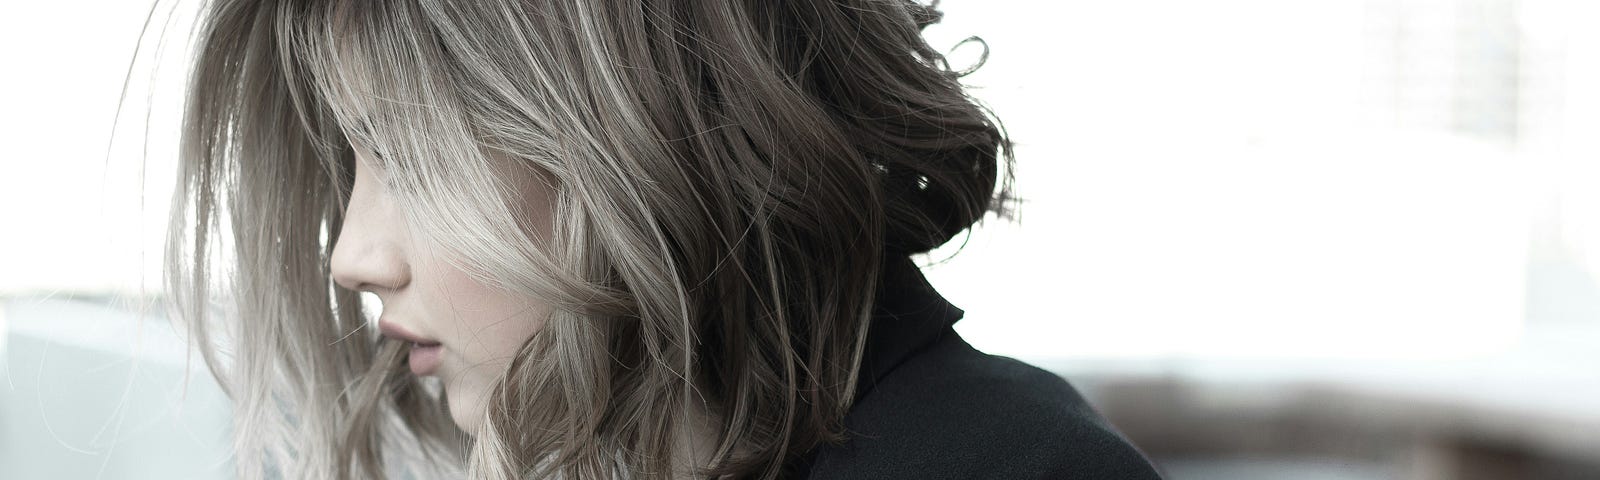 Photo from Upsplash of a seated woman in a black top with shoulder length hair that has gray streaks. Her hair is falling forward and covers much of her profile, only her nose and mouth can be seen.